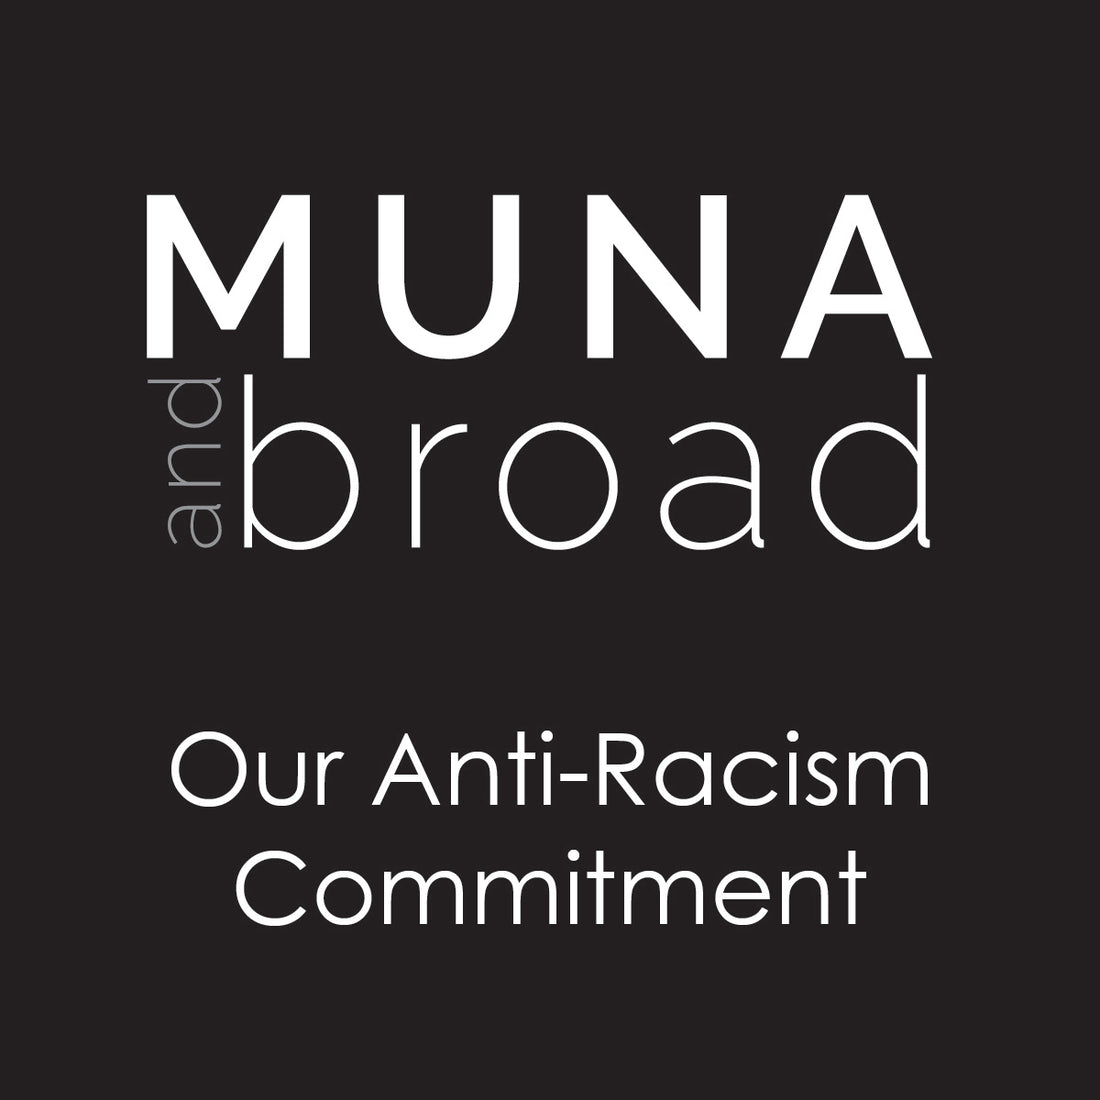 Our Anti-Racism Commitment